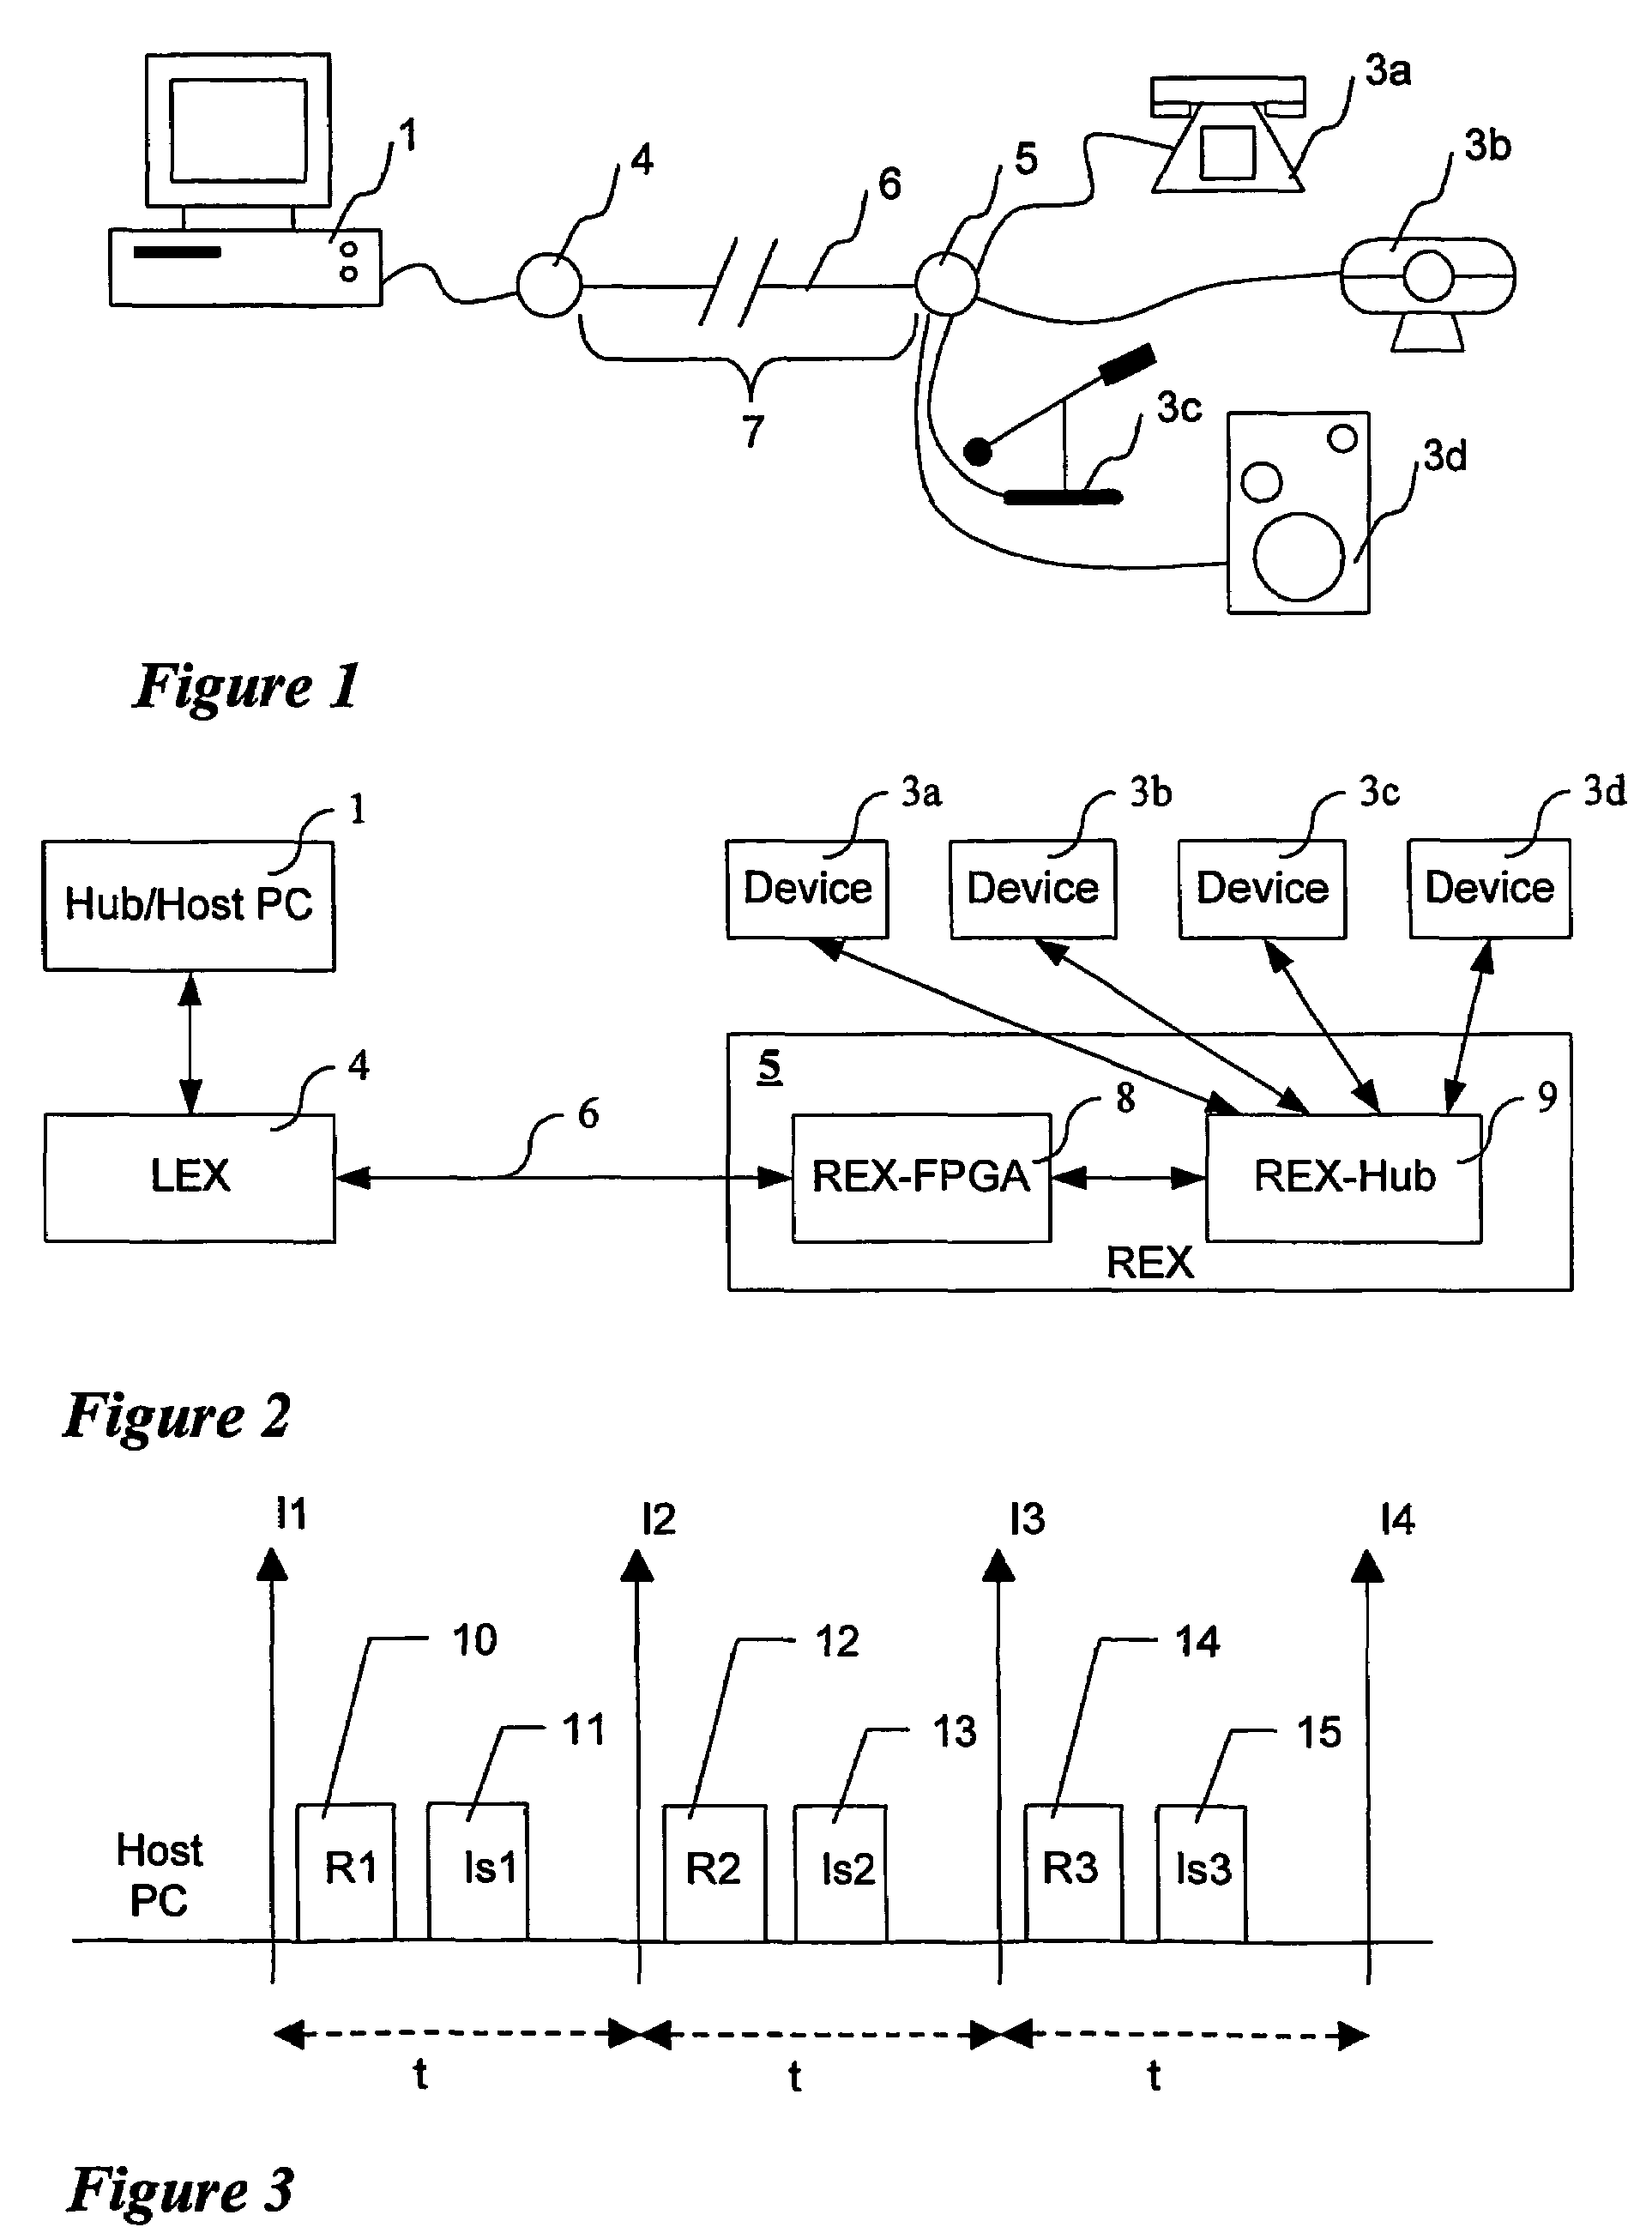 Method and apparatus for extending the range of the universal serial bus protocol